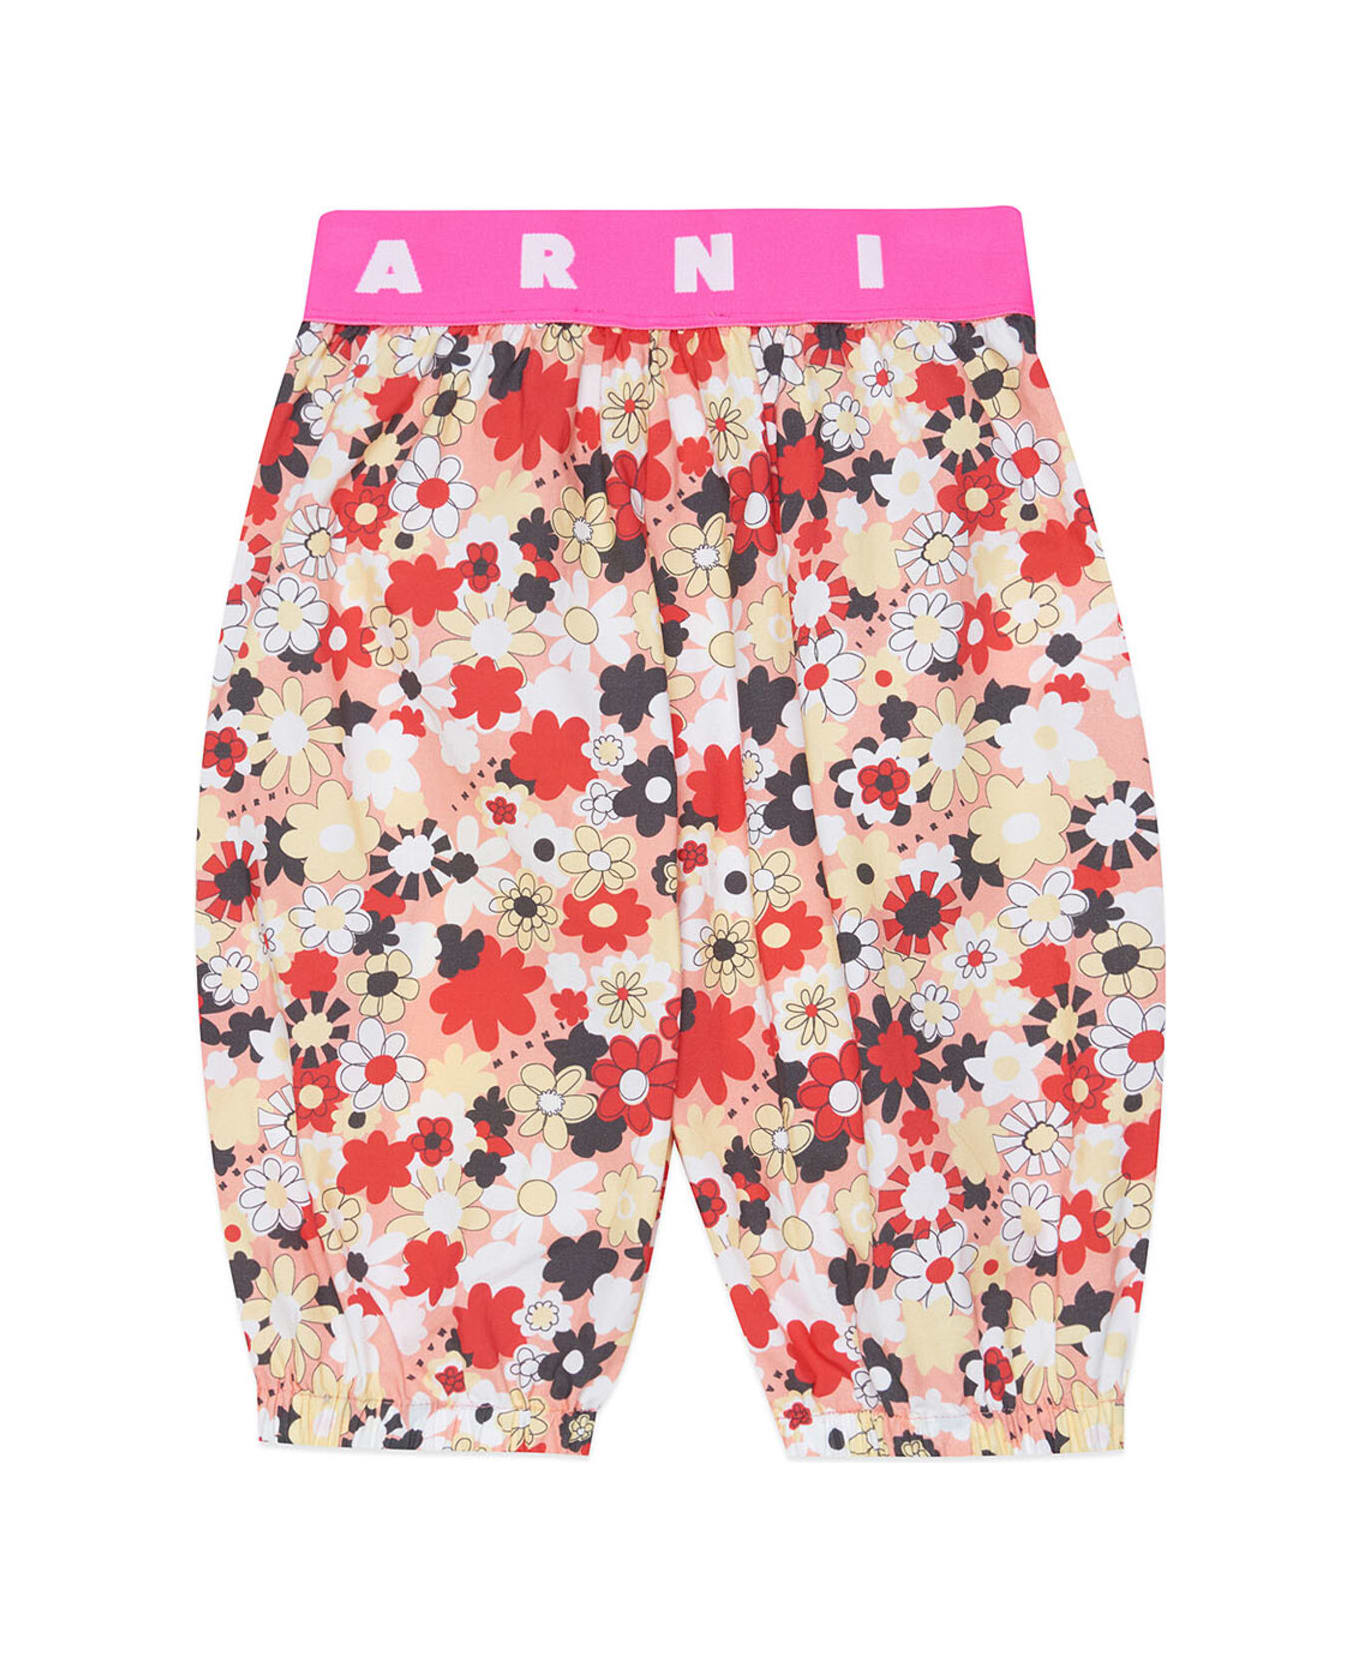 Marni Mp38b Rhode Trousers Marni Rhode Trousers In Poplin With Allover Flowers Pattern - Blossom